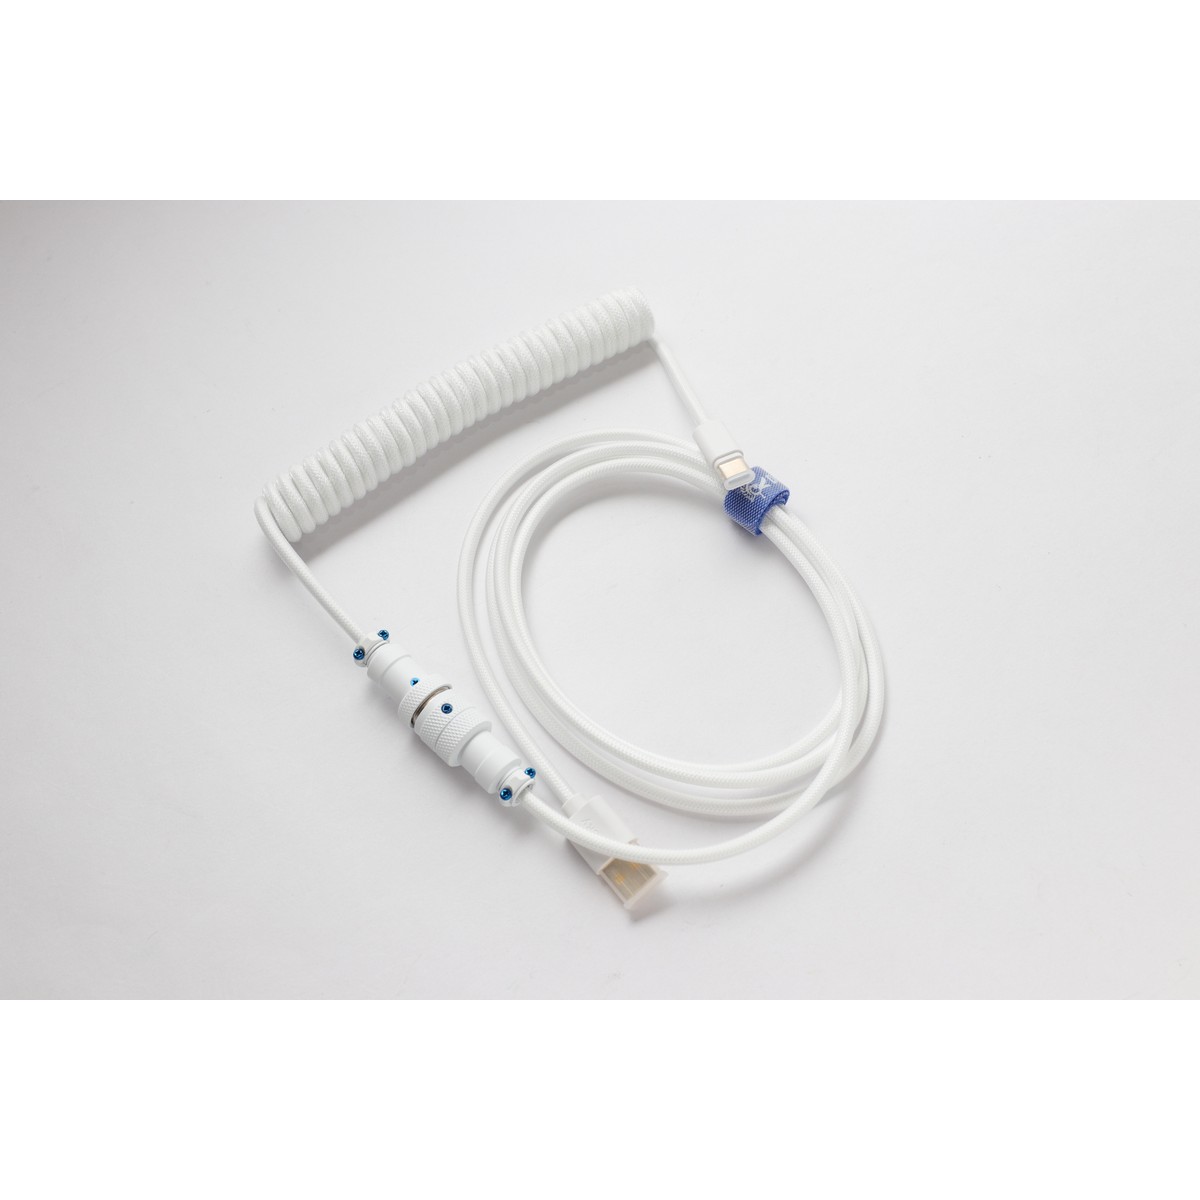 Ducky Premicord USB Coiled Keyboard Cable - Pure White - 1.8m